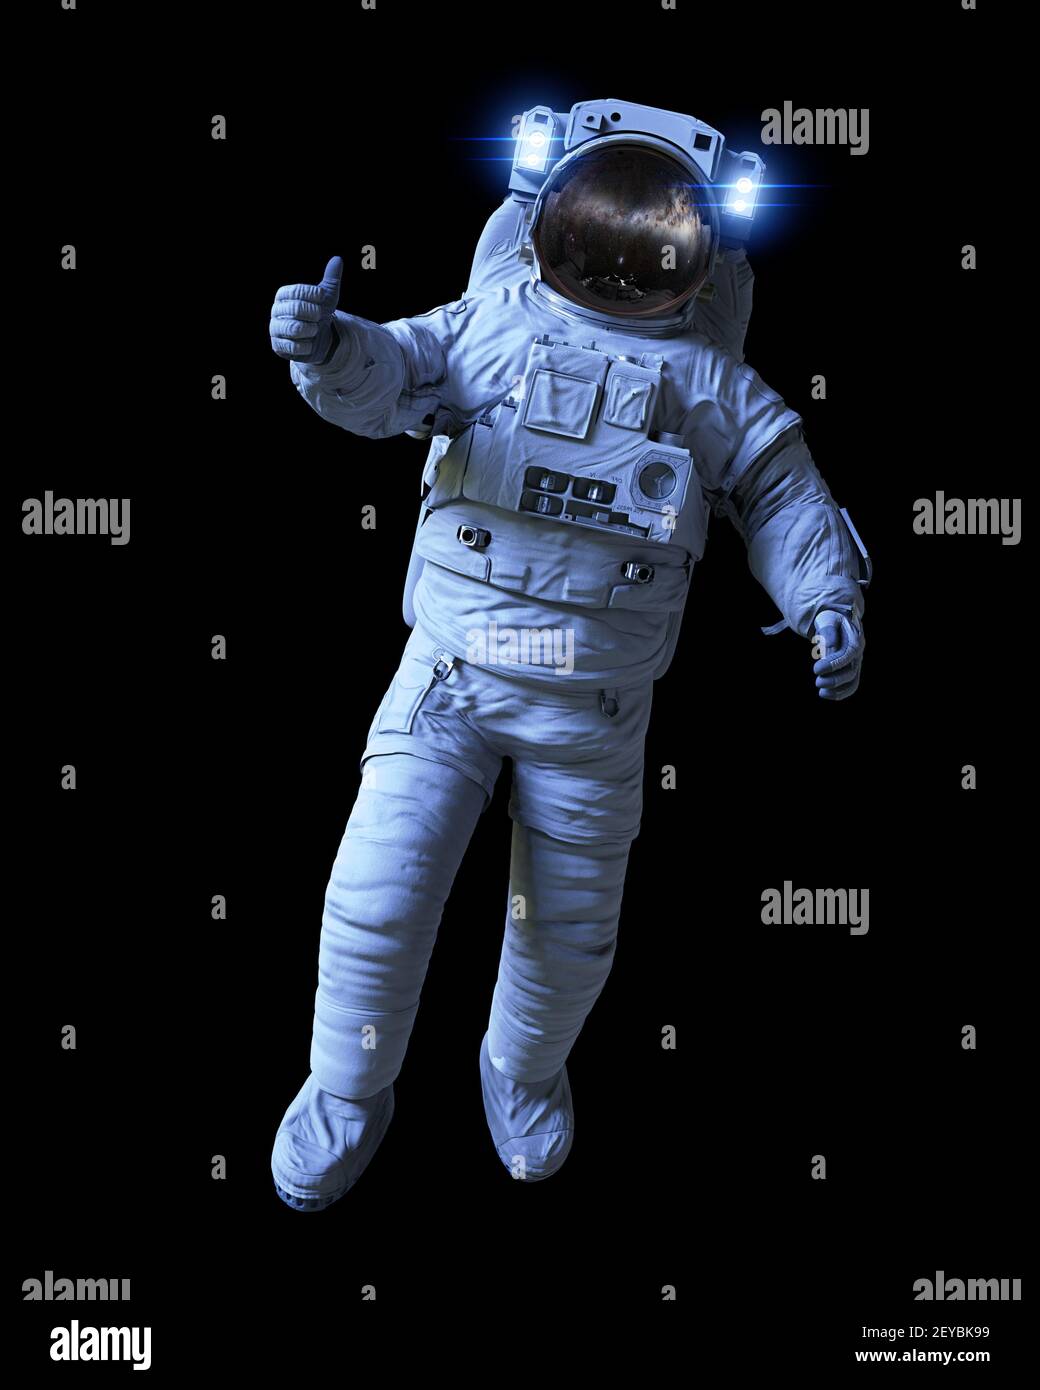 astronaut showing thumbs up, isolated on black background Stock Photo